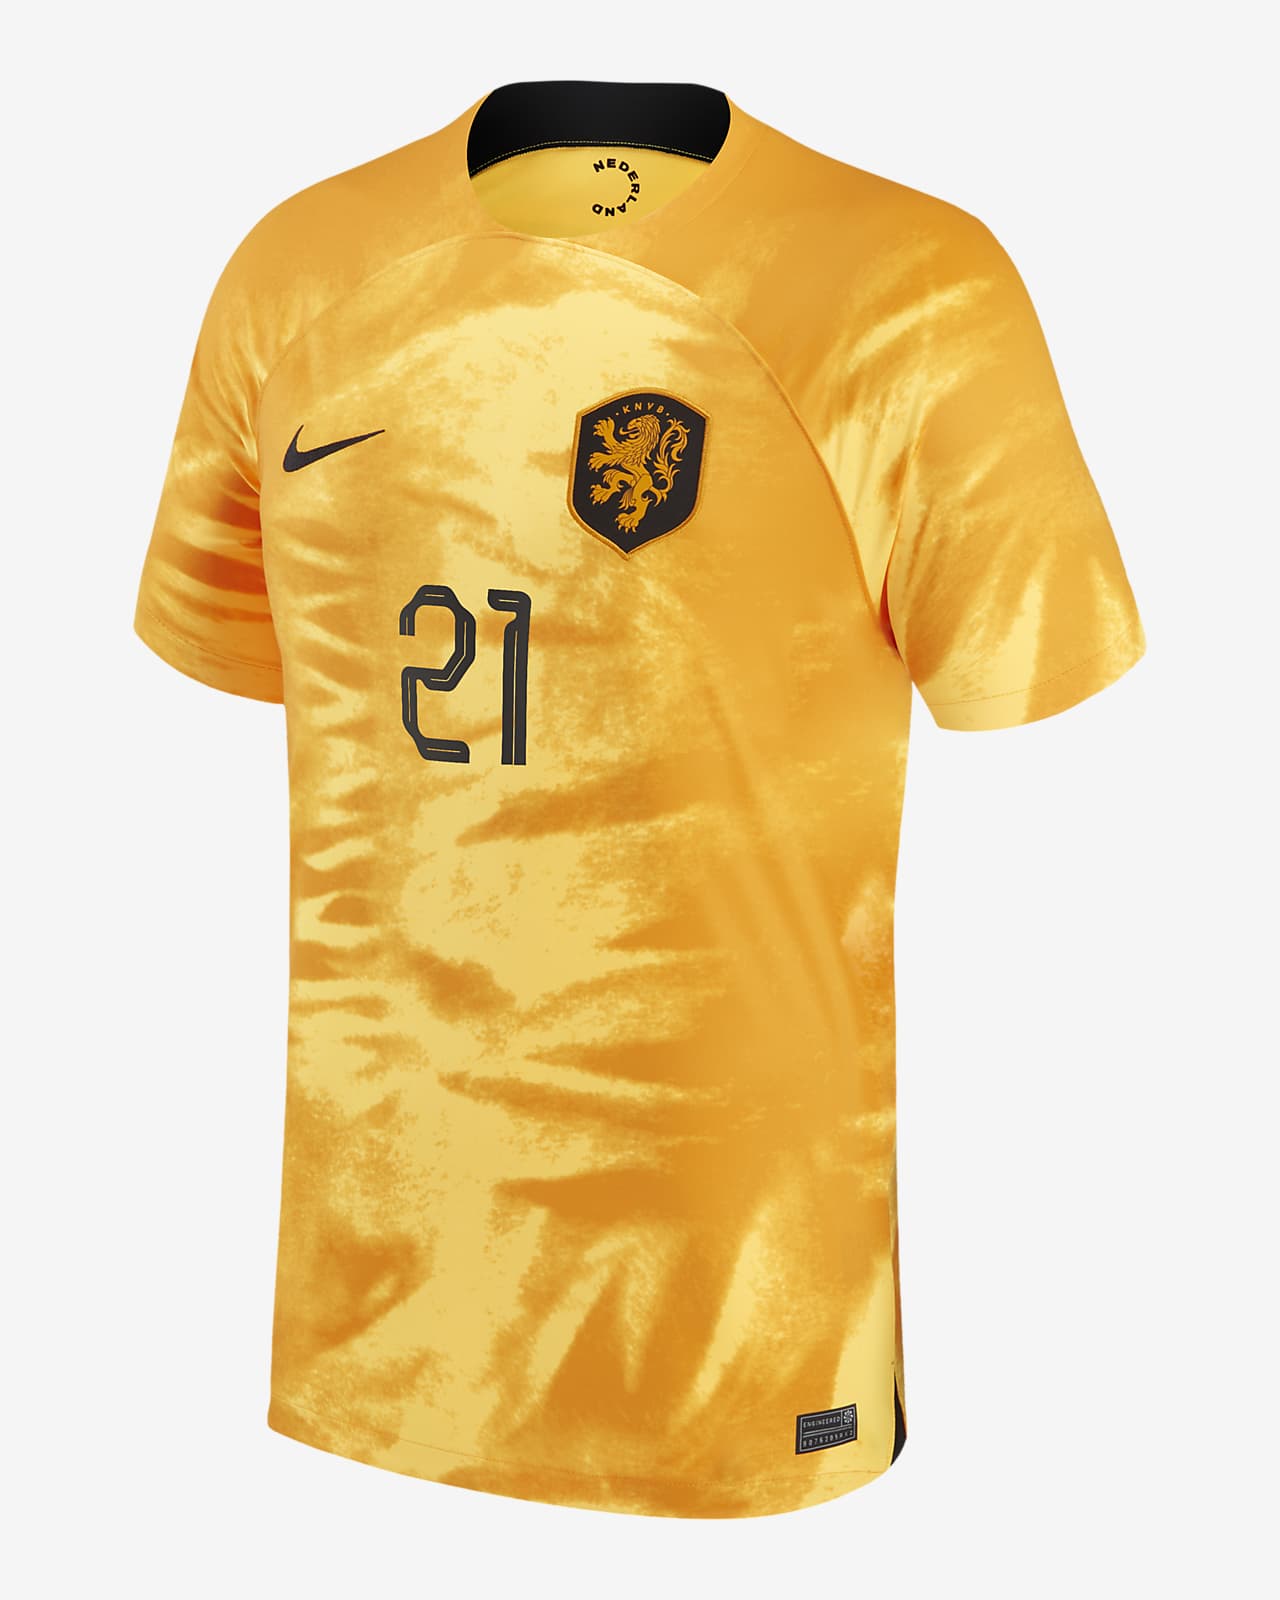 Buy Kane Jersey Online In India -  India